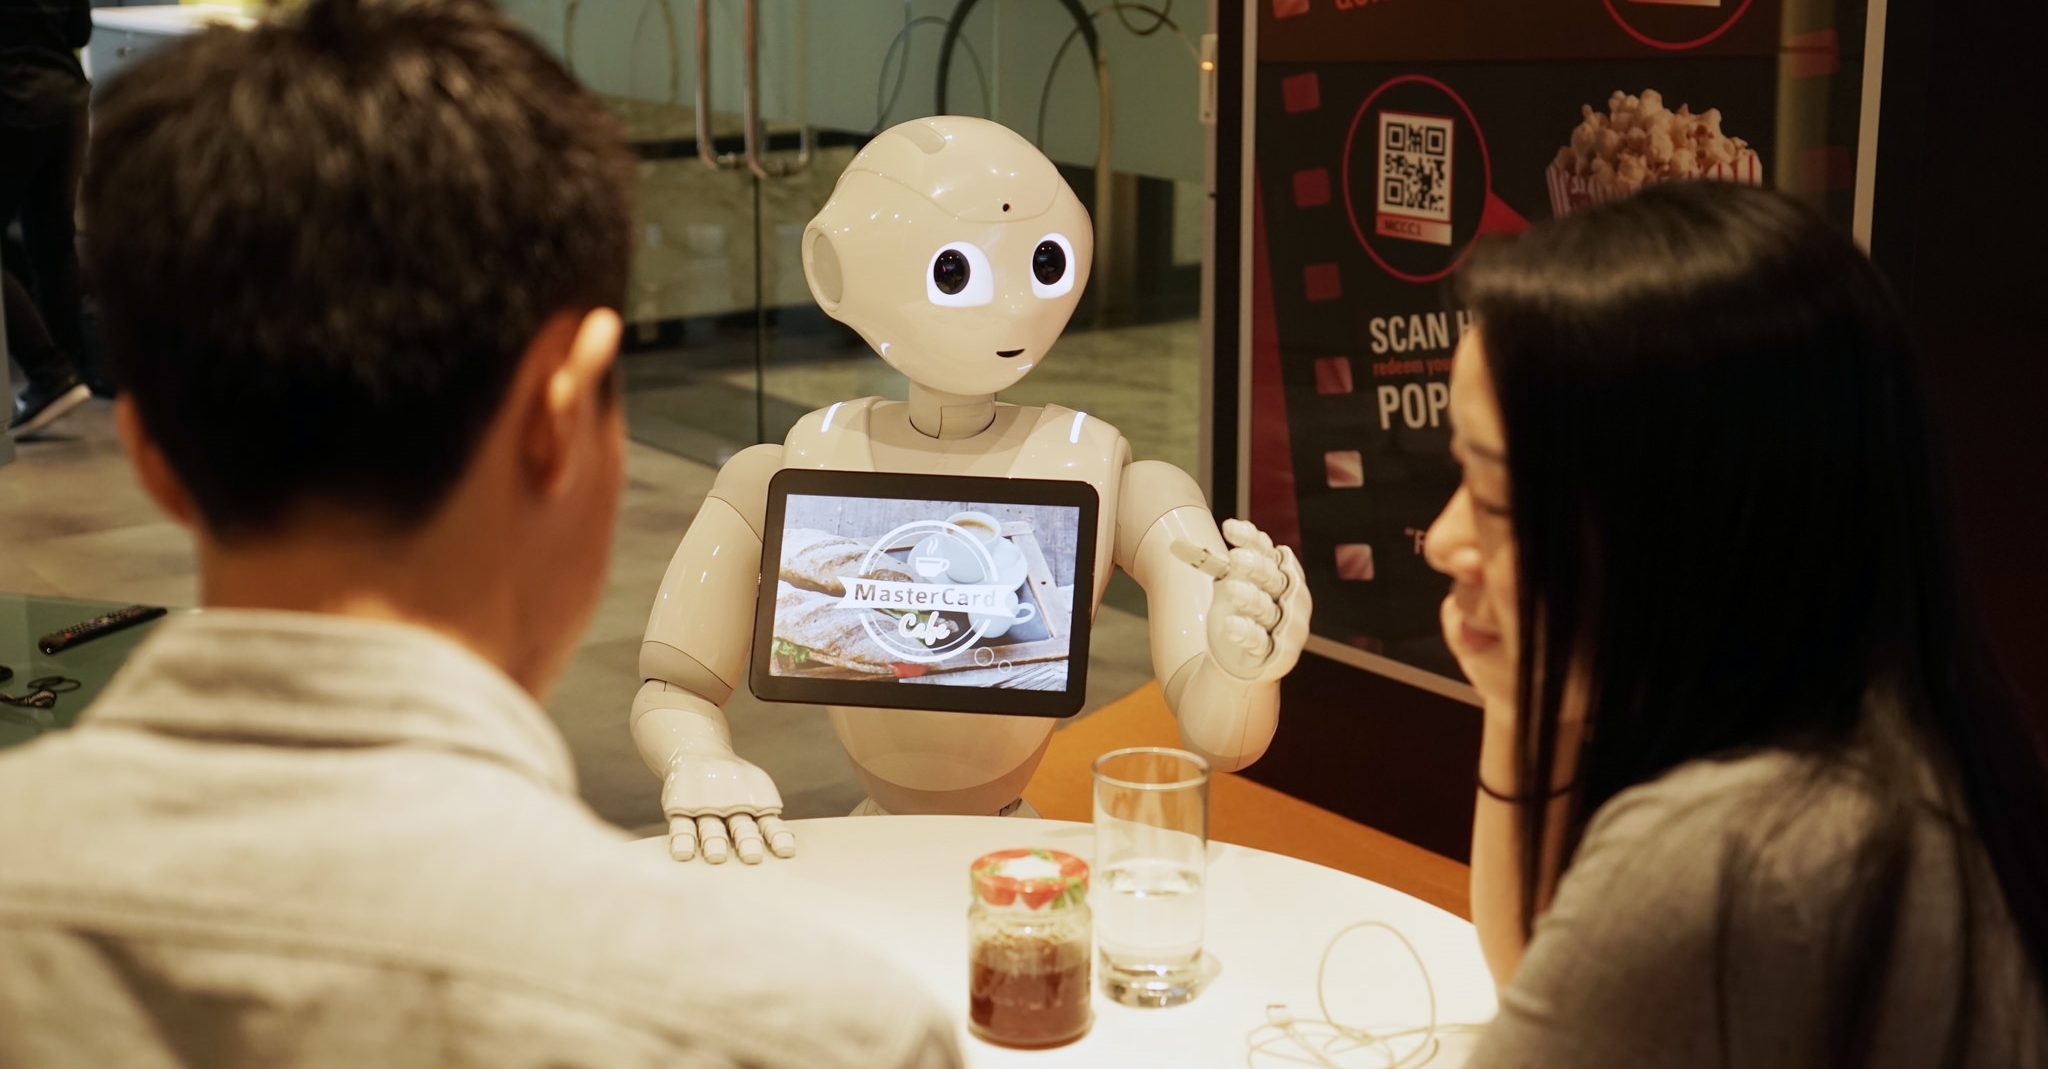 Pizza Hut Asia Hires Softbank's Pepper Robot for Customer Service